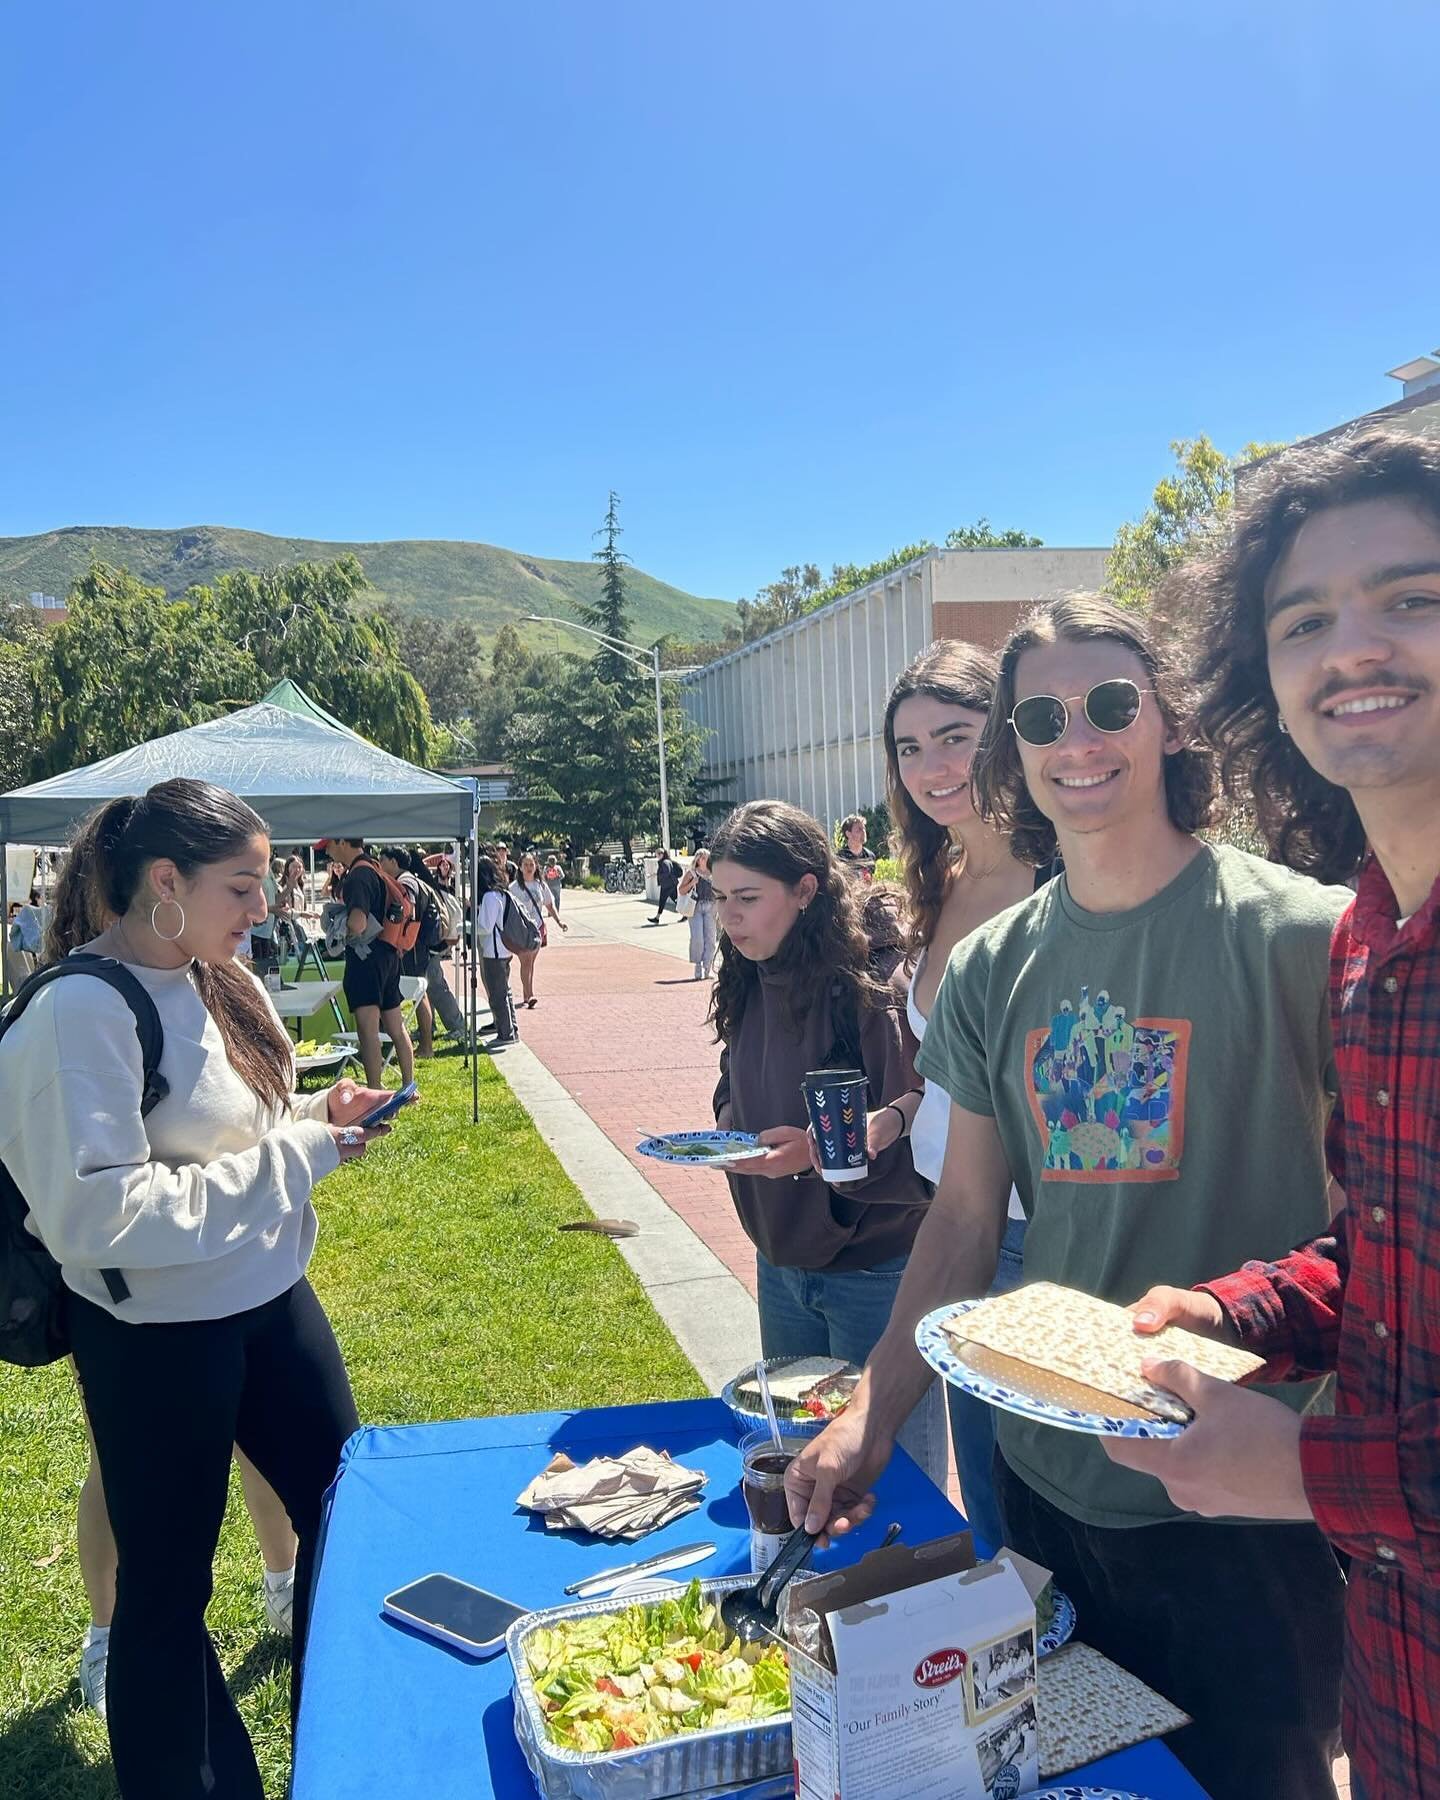 Yesterday was our last day of eating Matzah on dexter lawn! We hope you all had a wonderful Passover 🥰